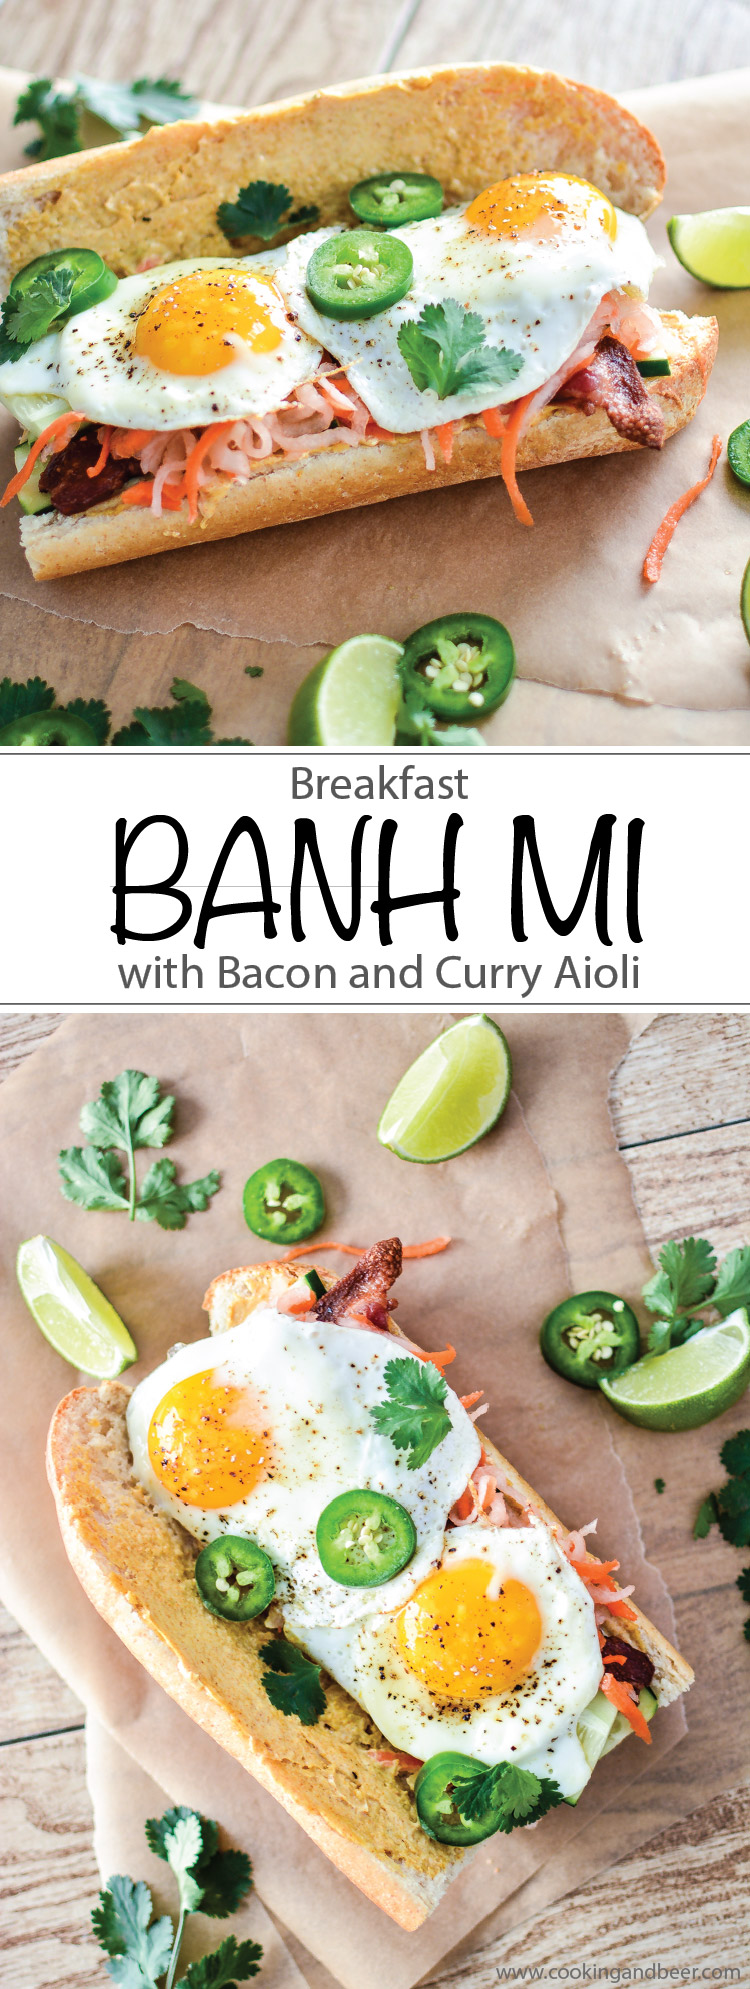 Breakfast Banh Mi sandwiches with Bacon and Curry Aioli are perfect any time of day! | www.cookingandbeer.com